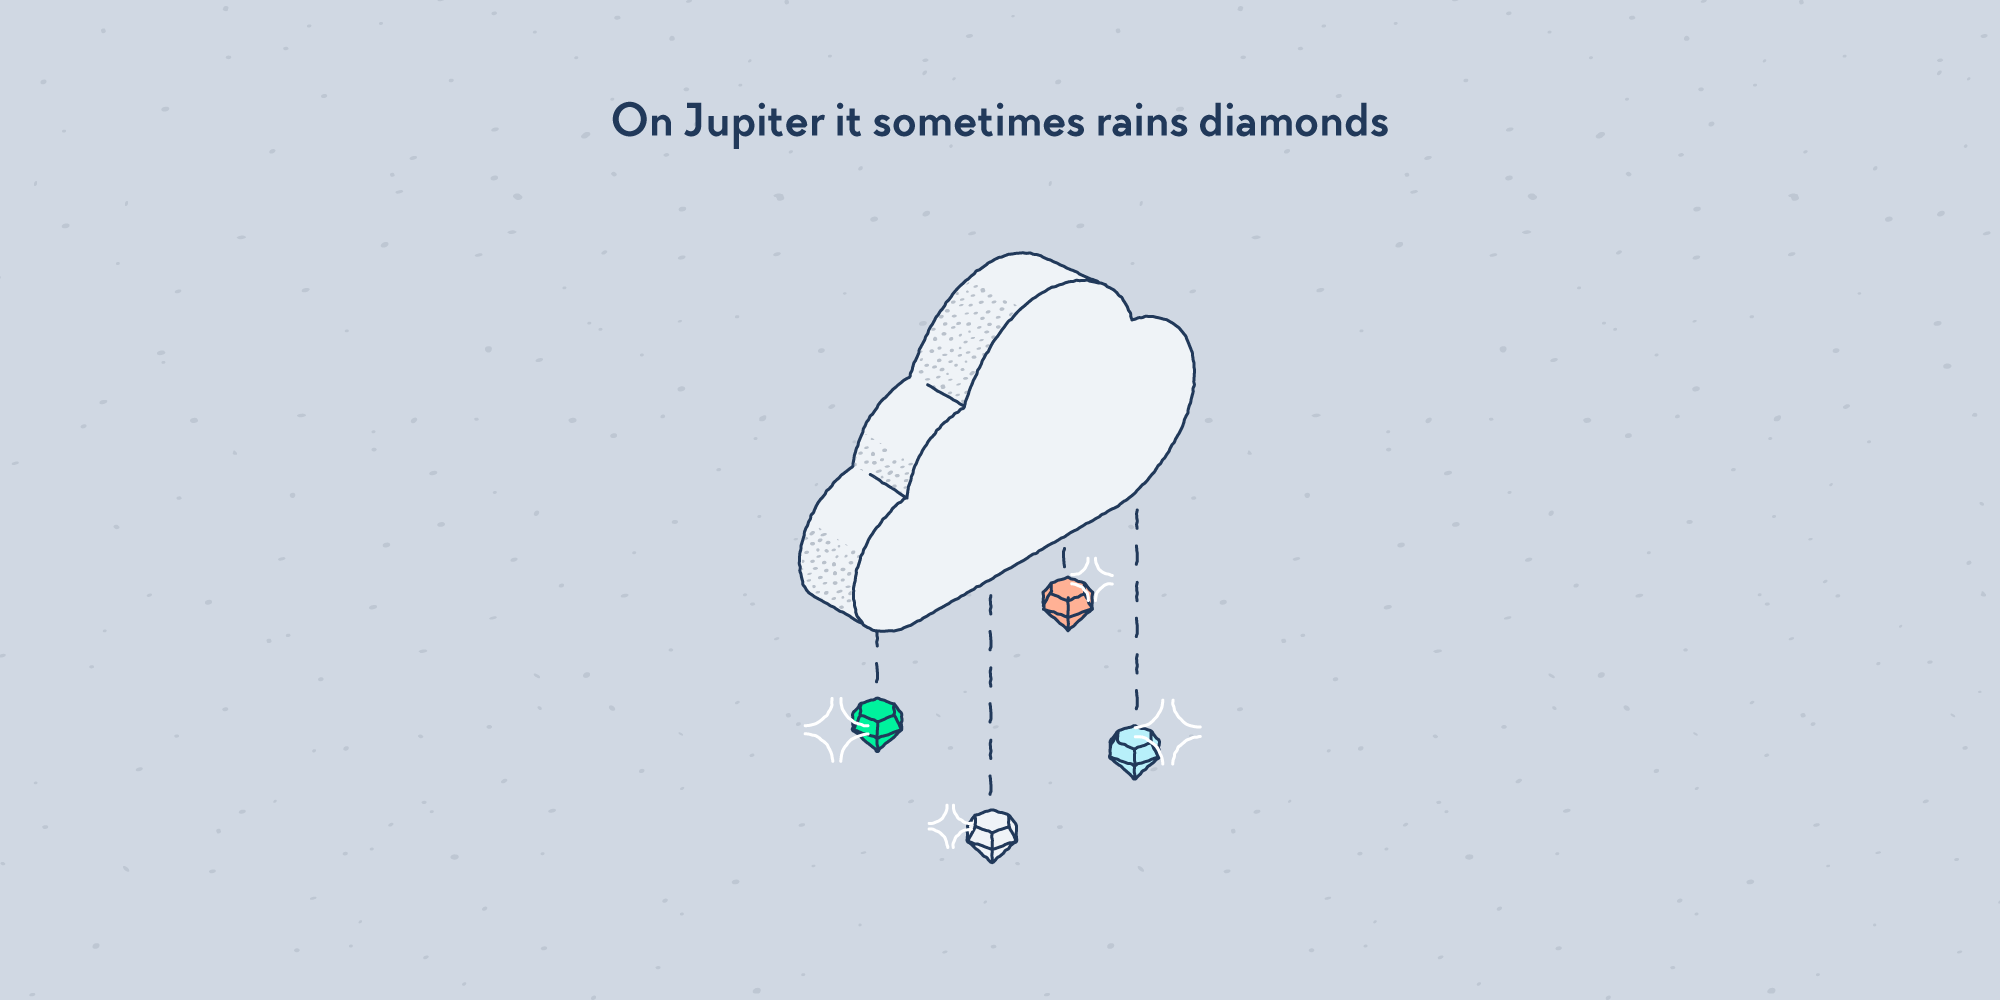 A cloud with a diamonds falling out of it.